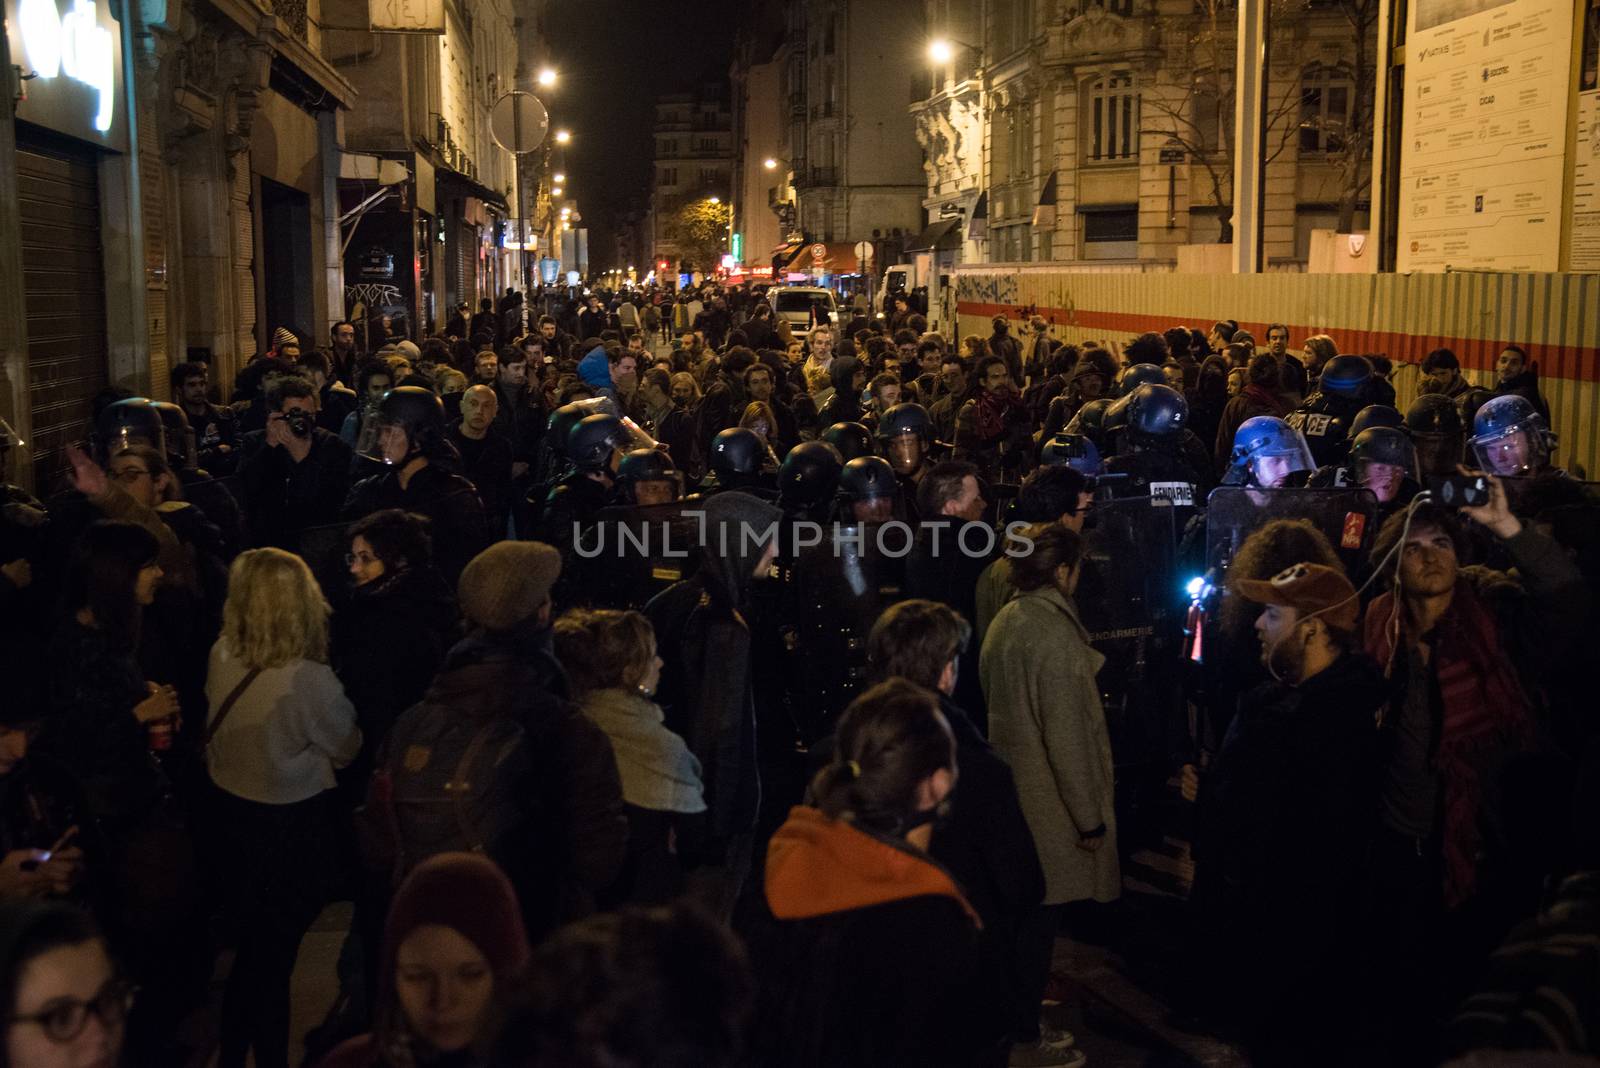 FRANCE - LABOUR - LAW - PROTEST - NIGHT by newzulu